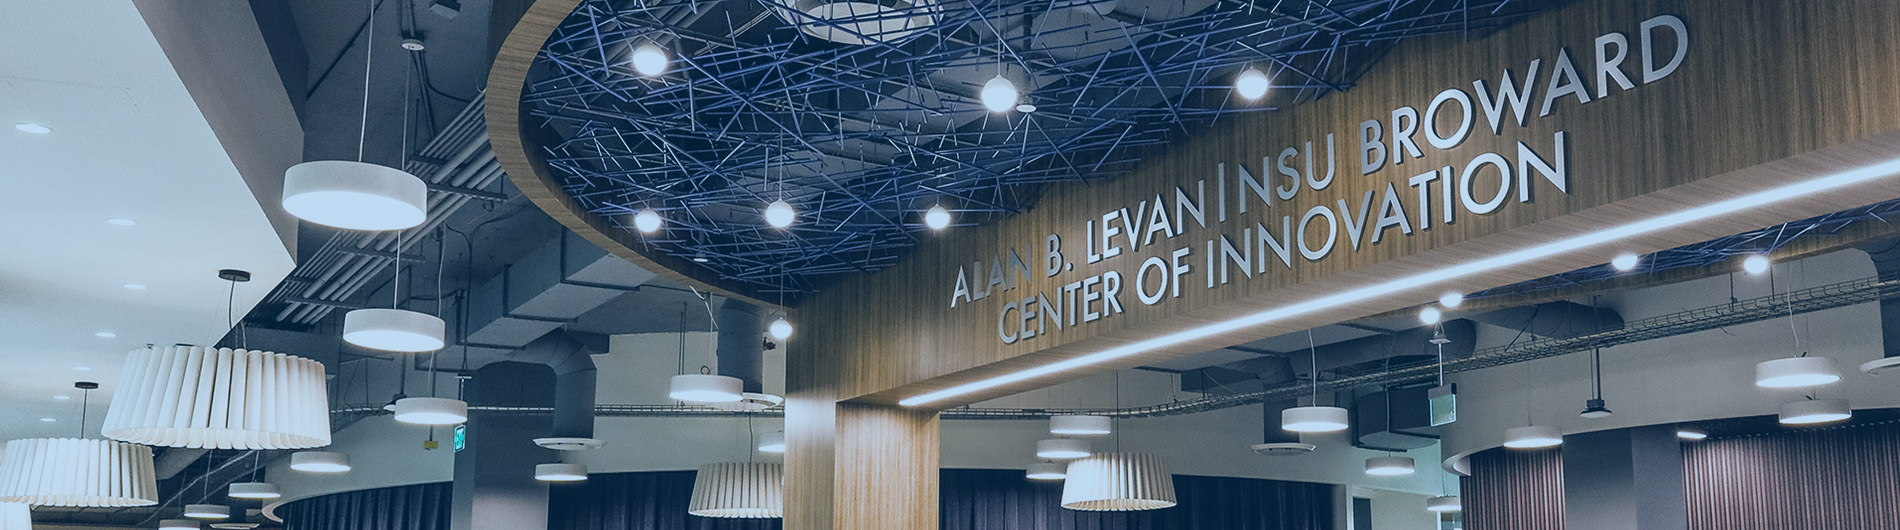 An image of the Levan Center lobby